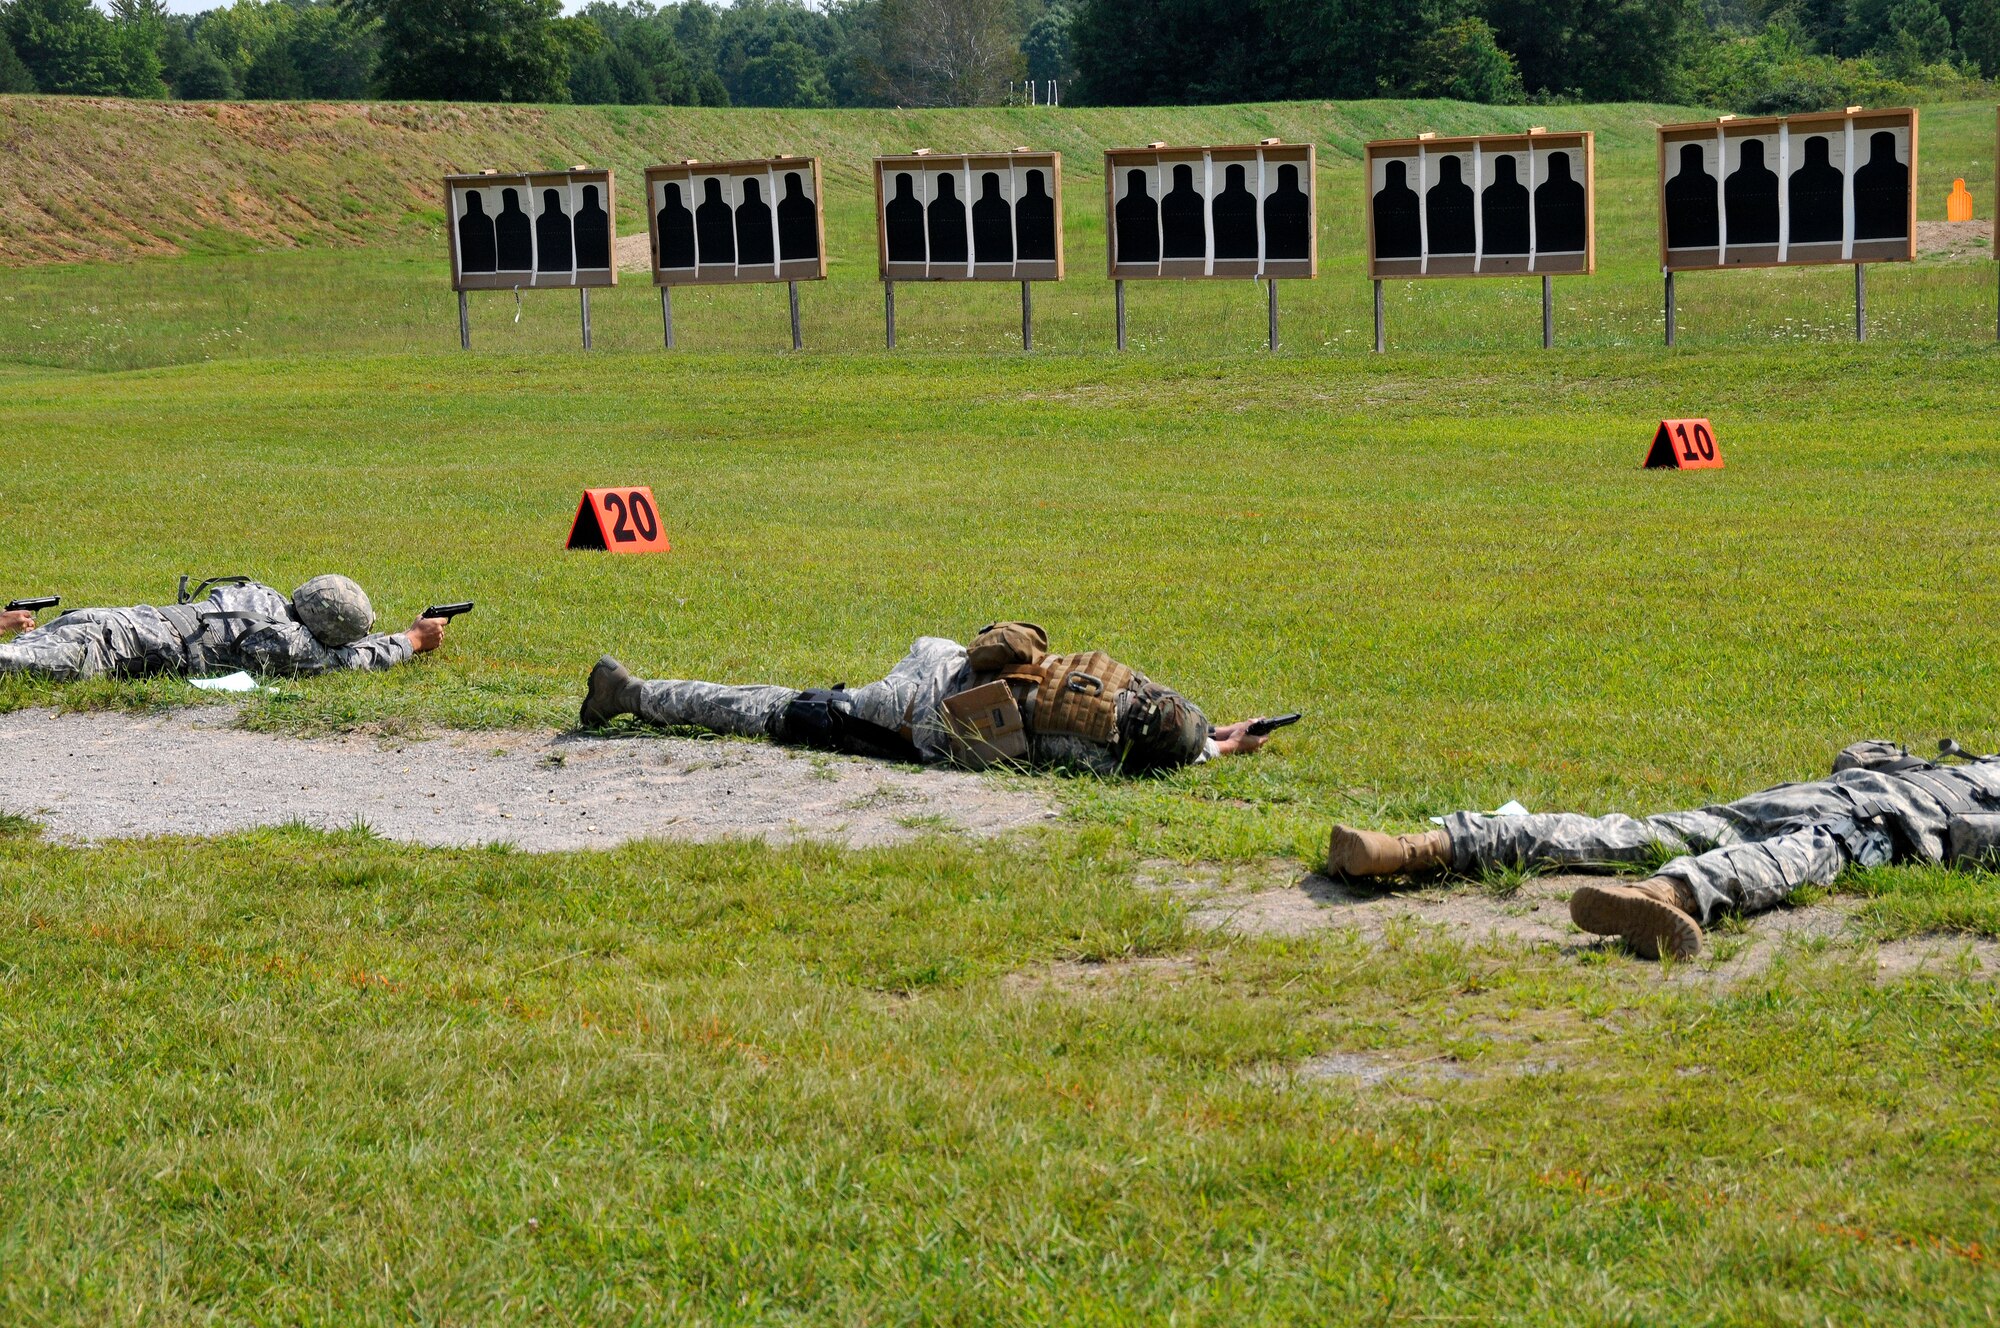 Members of the Tennessee Army and Air National Guard hone their shooting skills in the prone position with a Beretta M9 service pistol during a training session at the 2014 Tennessee Adjutant General Marksmanship Pistol Match in Tullahoma, TN on Aug 15. The Tennesee TAG Match is held anually to promote marksmanship skills in the Army and Air National Guard.  (U.S. Air National Guard photo by Master Sgt. Kendra M. Owenby, 134 ARW Public Affairs)